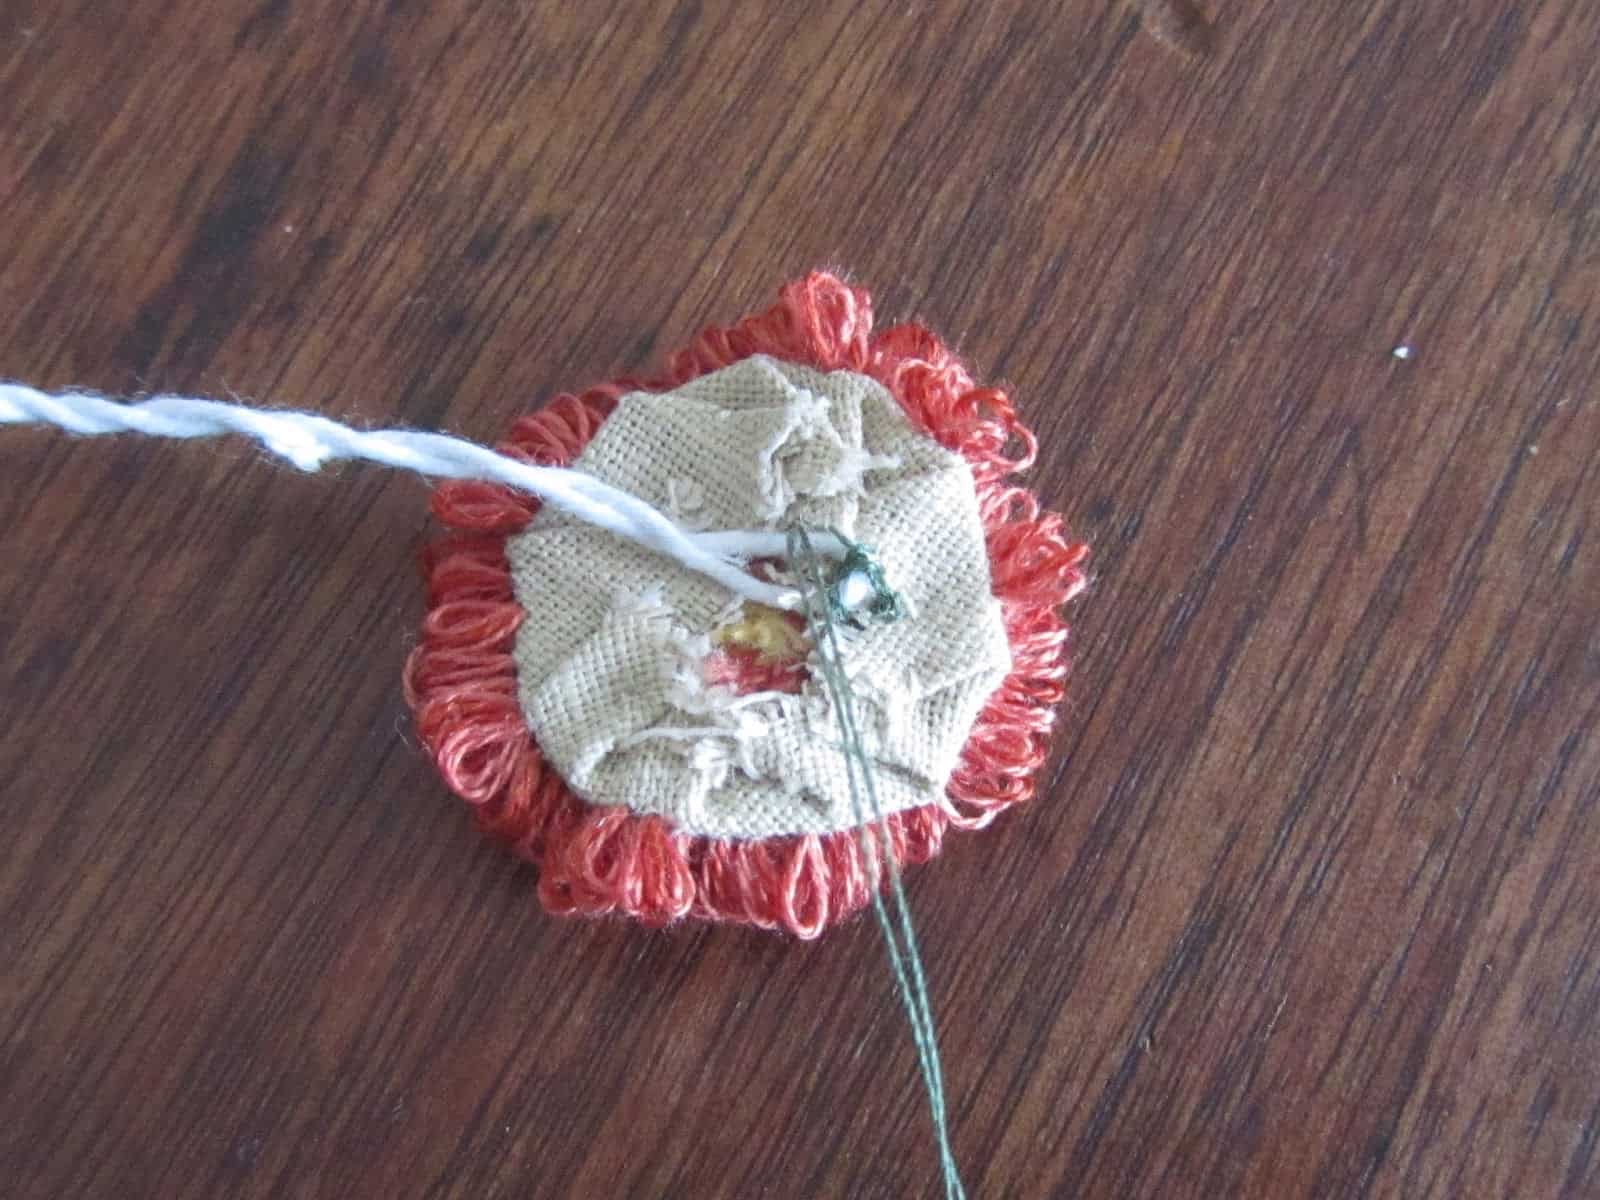 sewing the wire to the flower